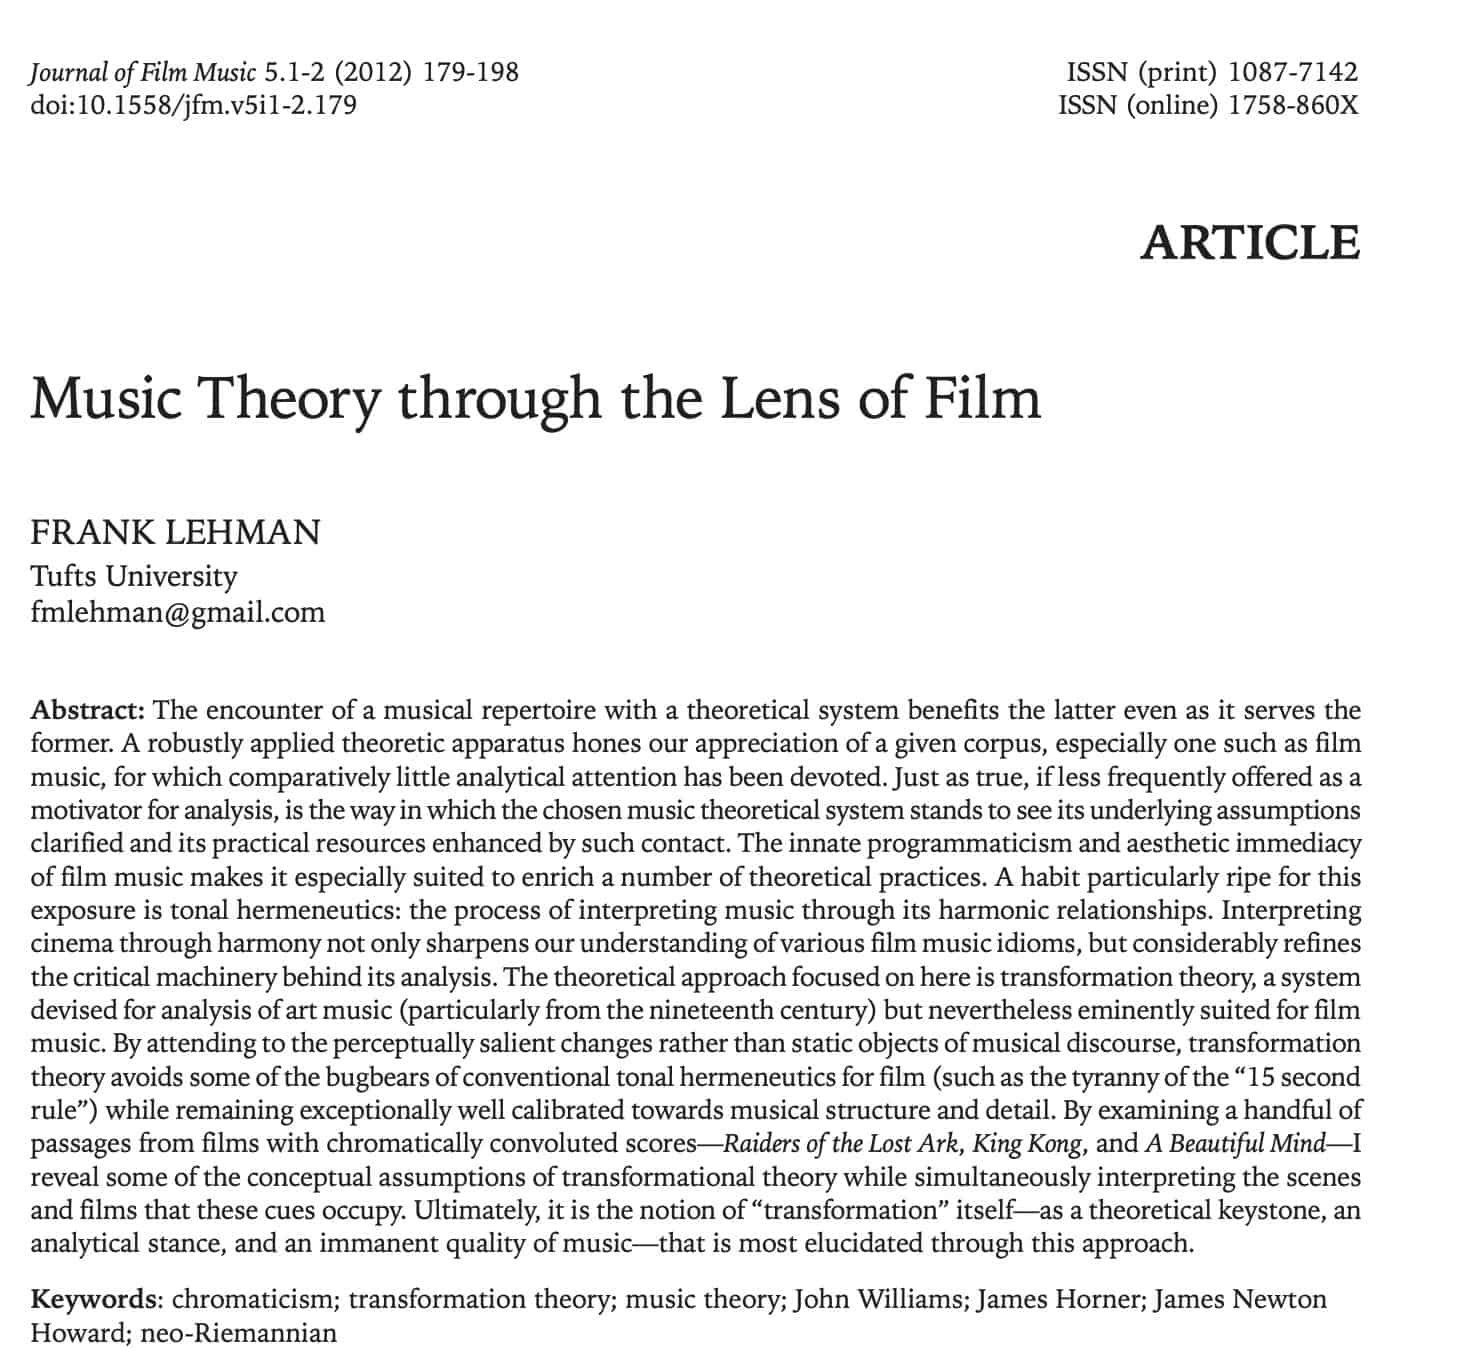 Music-Theory-Through-the-Lens-of-Film-by-Frank-Lehman-1